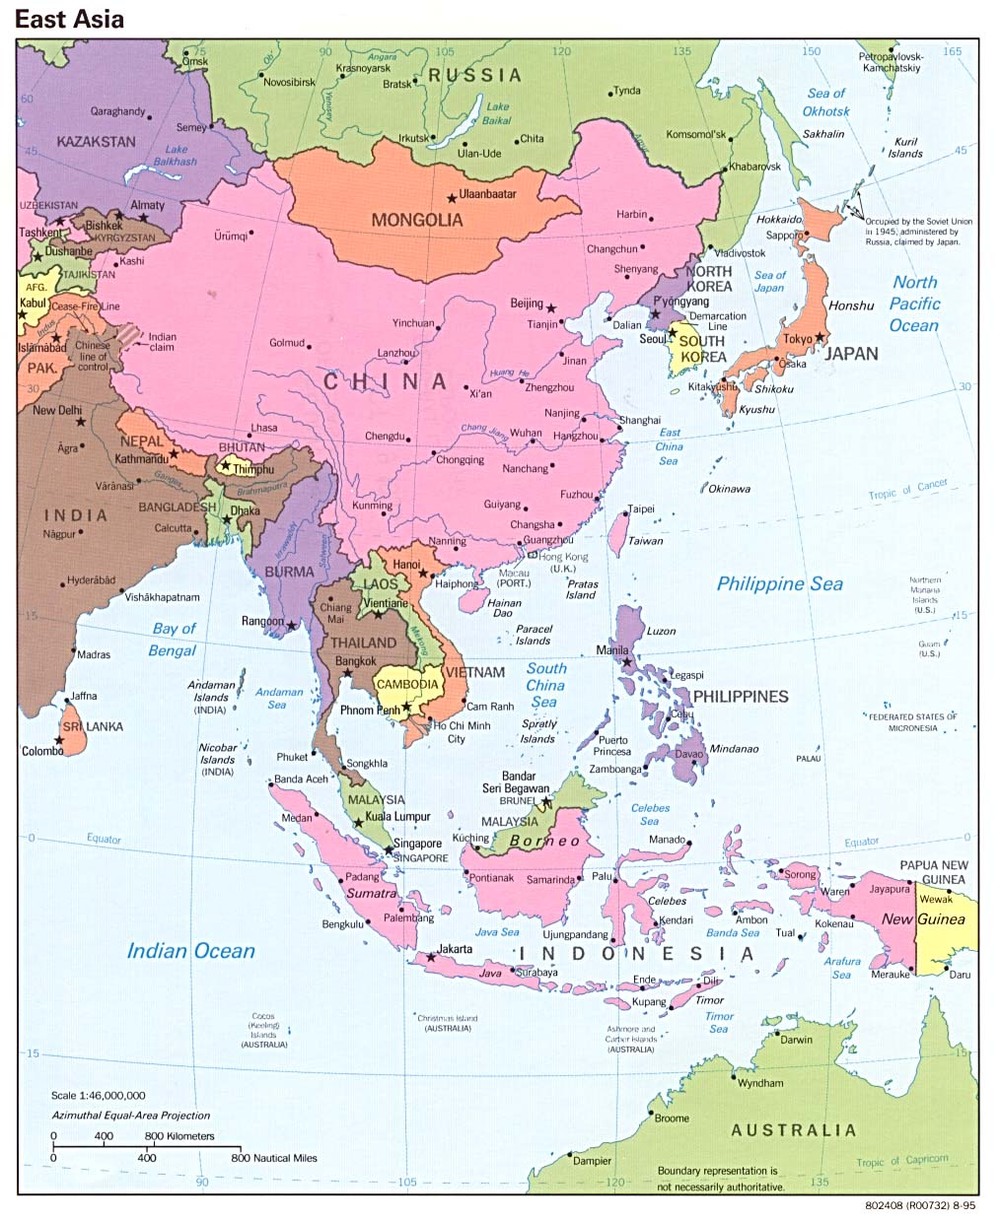 east asia political map